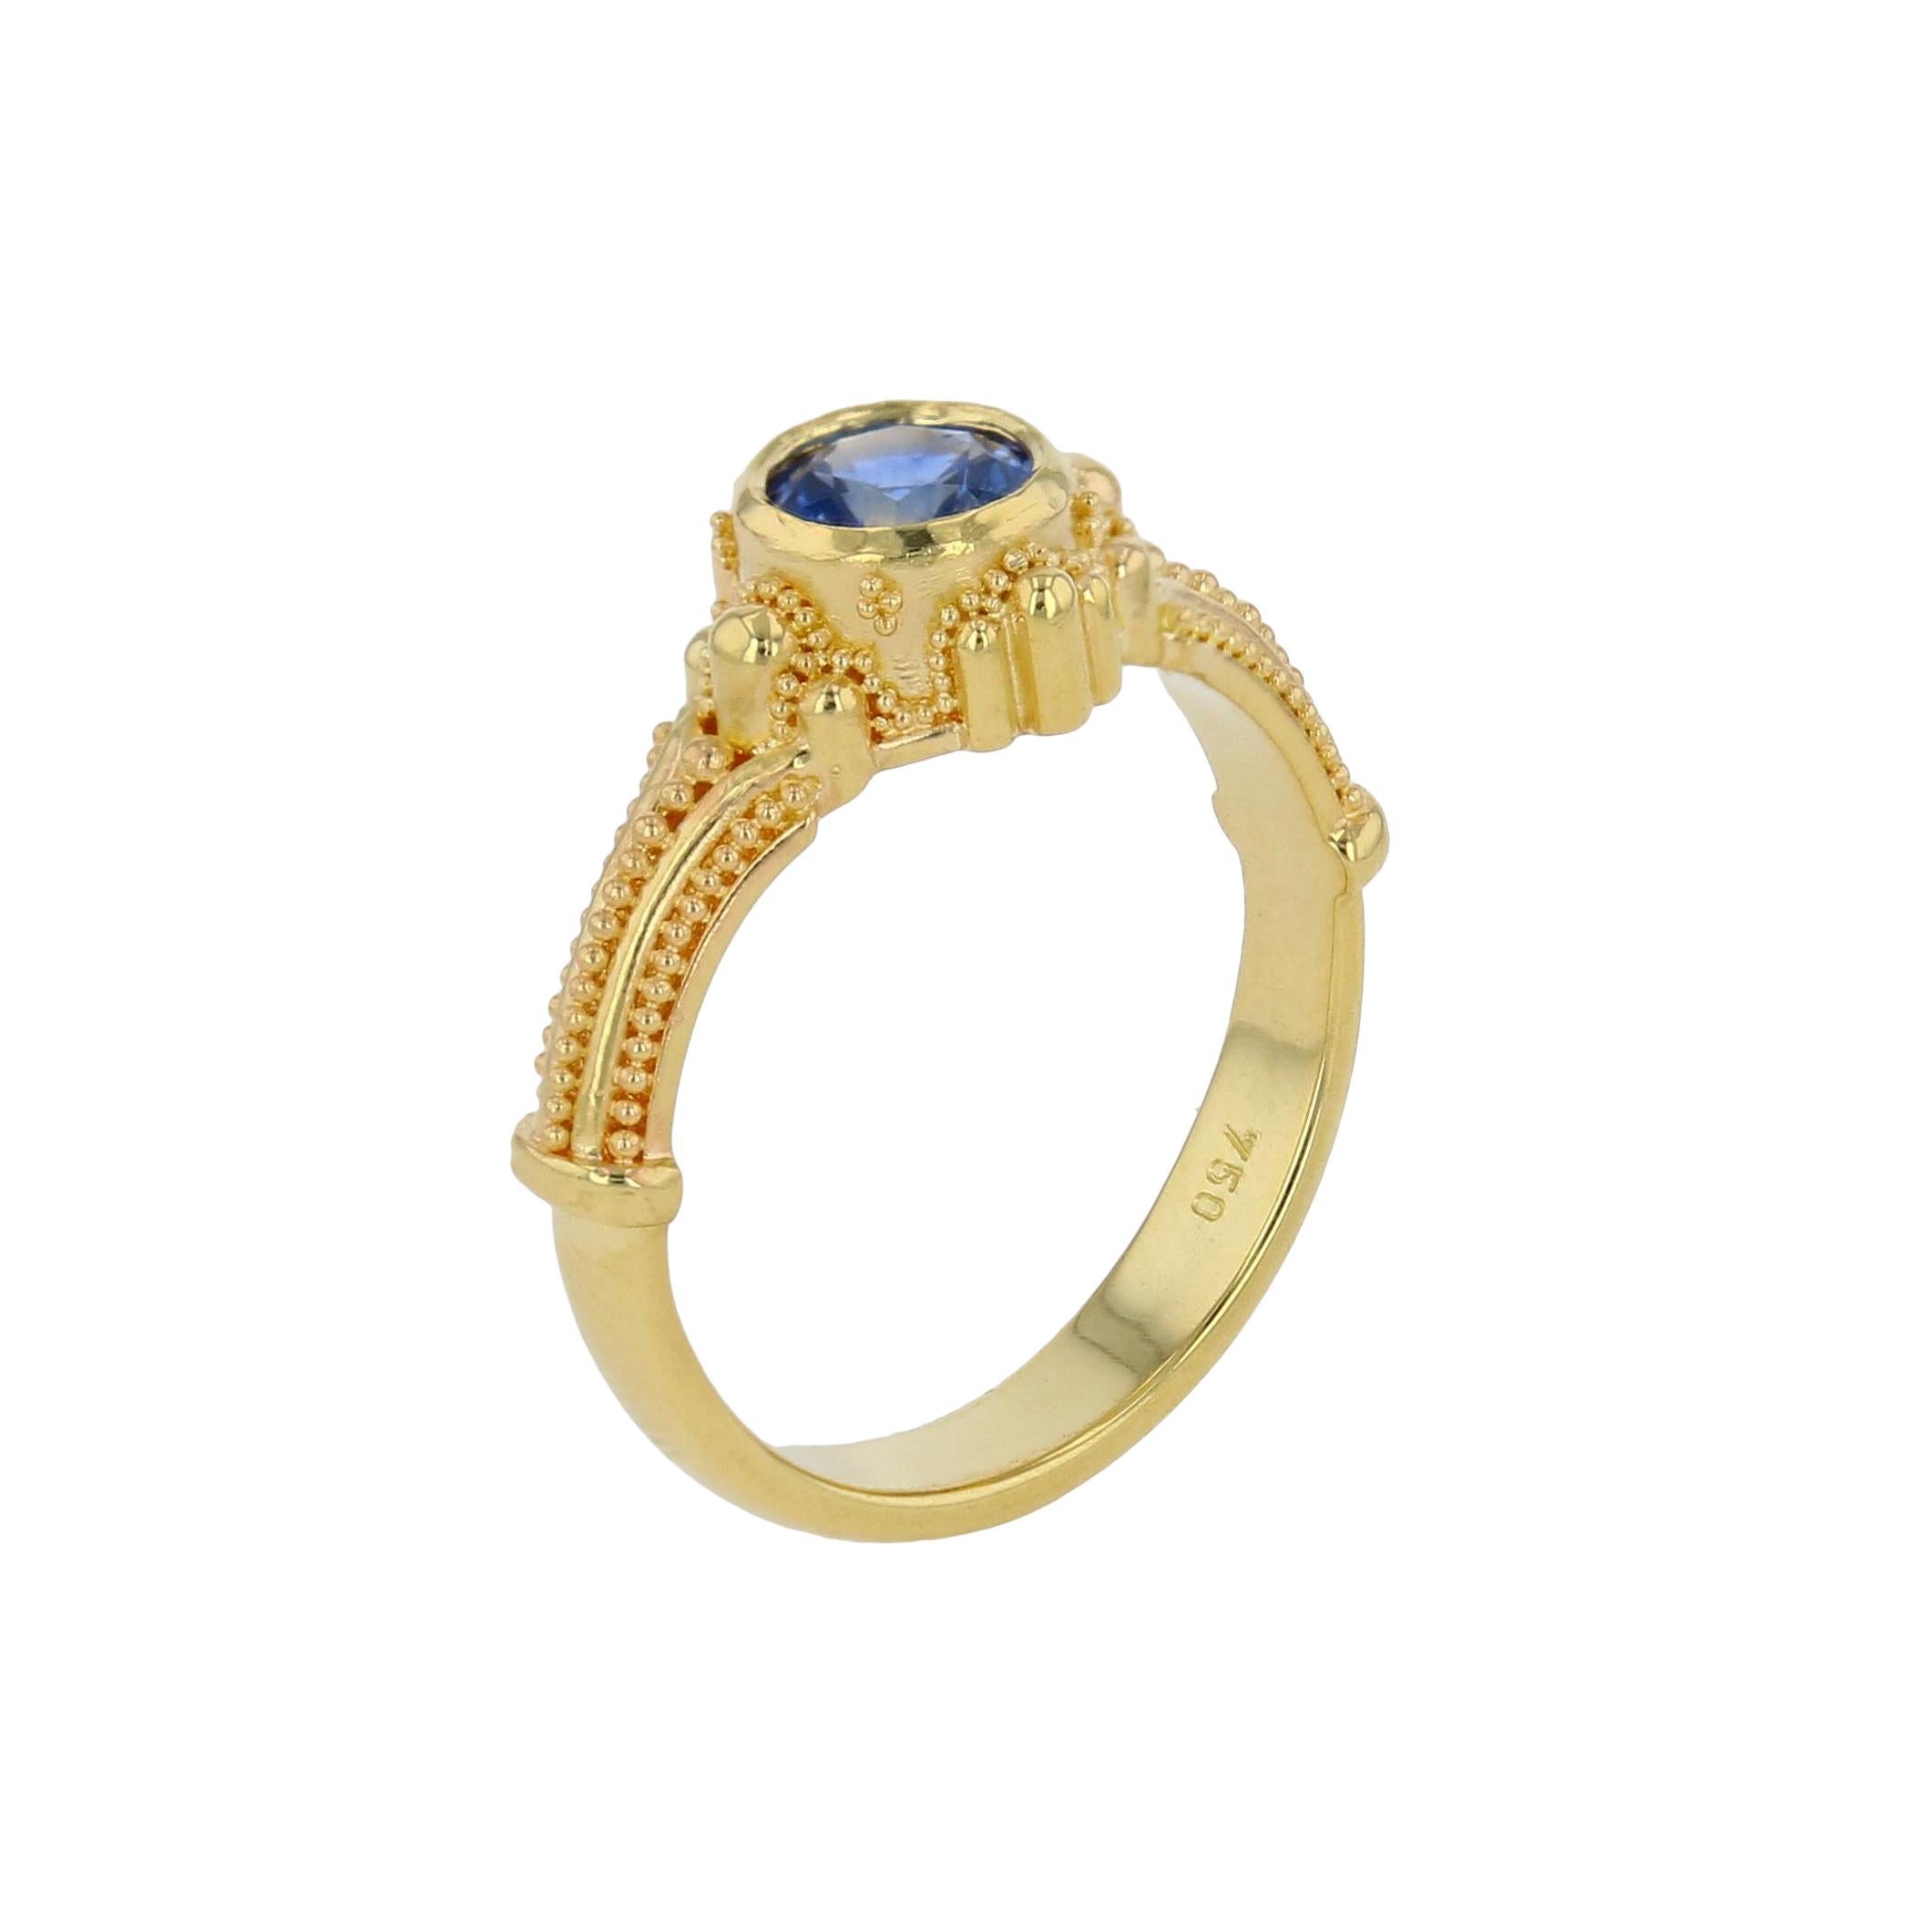 Women's or Men's Kent Raible 18 Karat Gold Solitare Ring with Blue Sapphire and fine Granulation For Sale